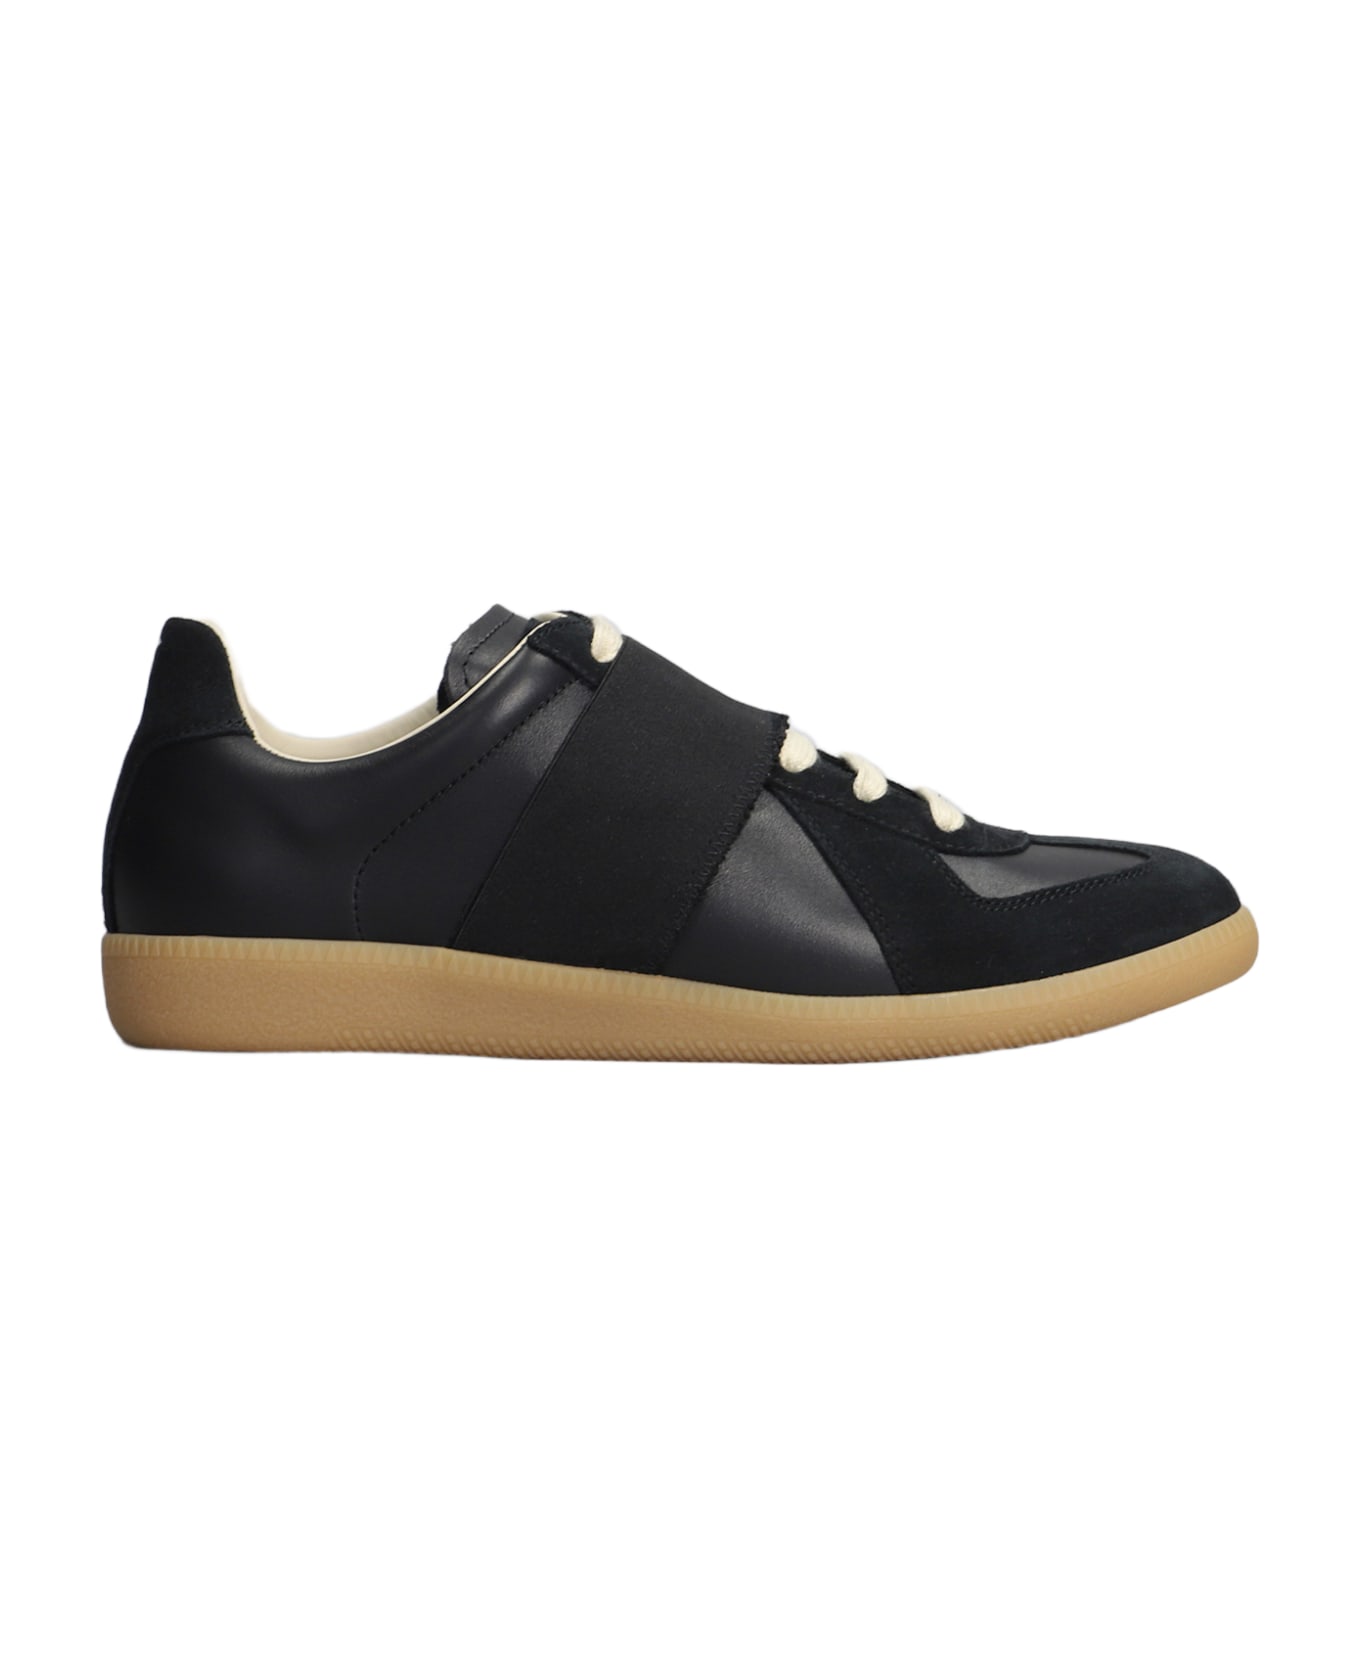 Maison Margiela Replica Sneakers In Black Suede And Leather - black